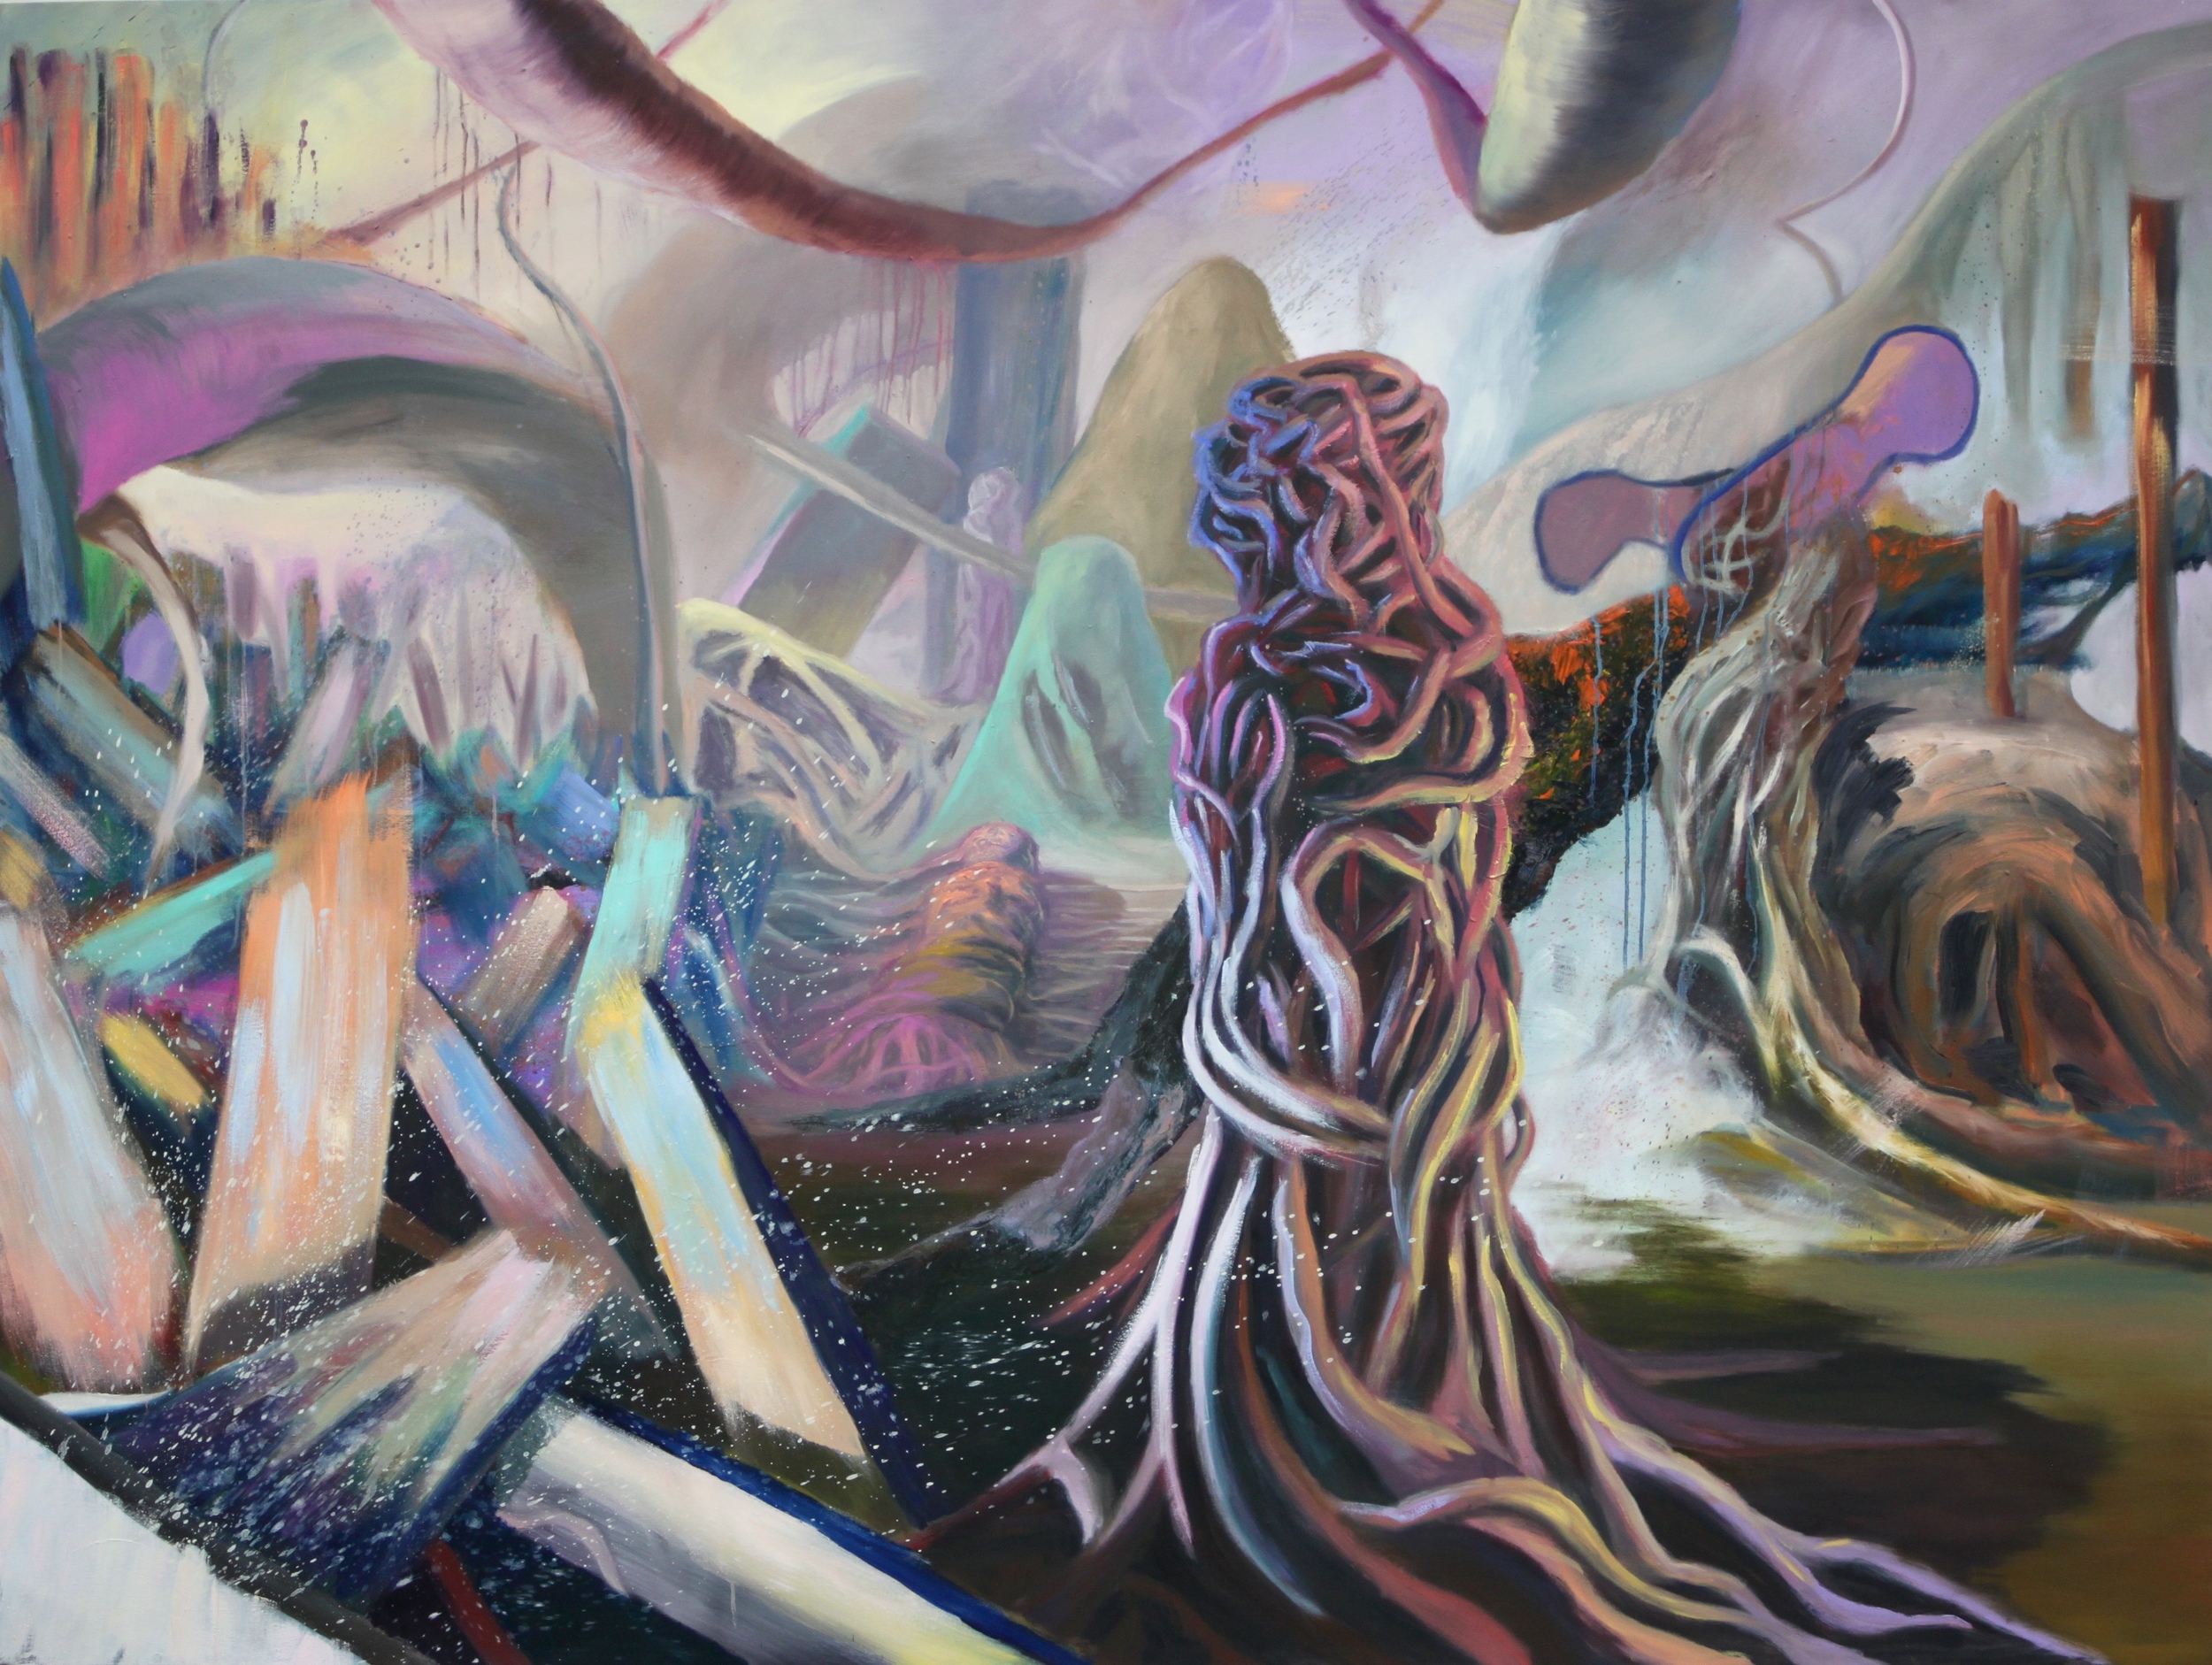   Entangled: 3   Oil Paint on Canvas  72x96 inches  2015 